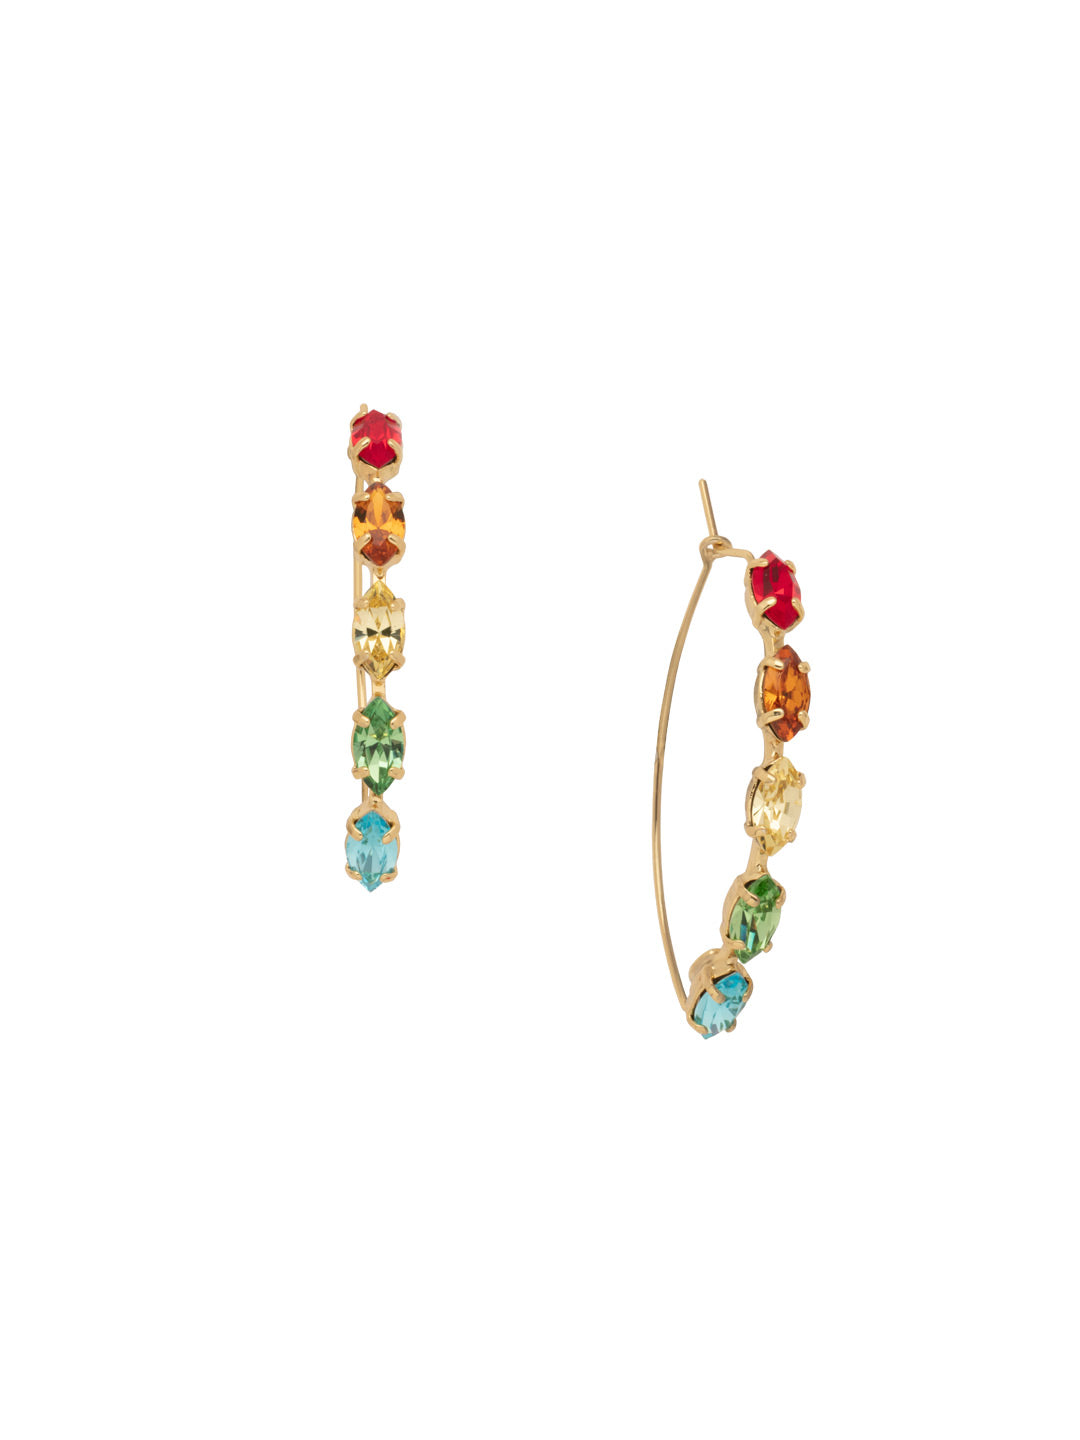 Vera Mini Hoop Earrings - 8EA11BGPRI - <p>Navette crystals line an oblong hoop to create the trendy Vera Mini Hoop Earrings. From Sorrelli's Prism collection in our Bright Gold-tone finish.</p>